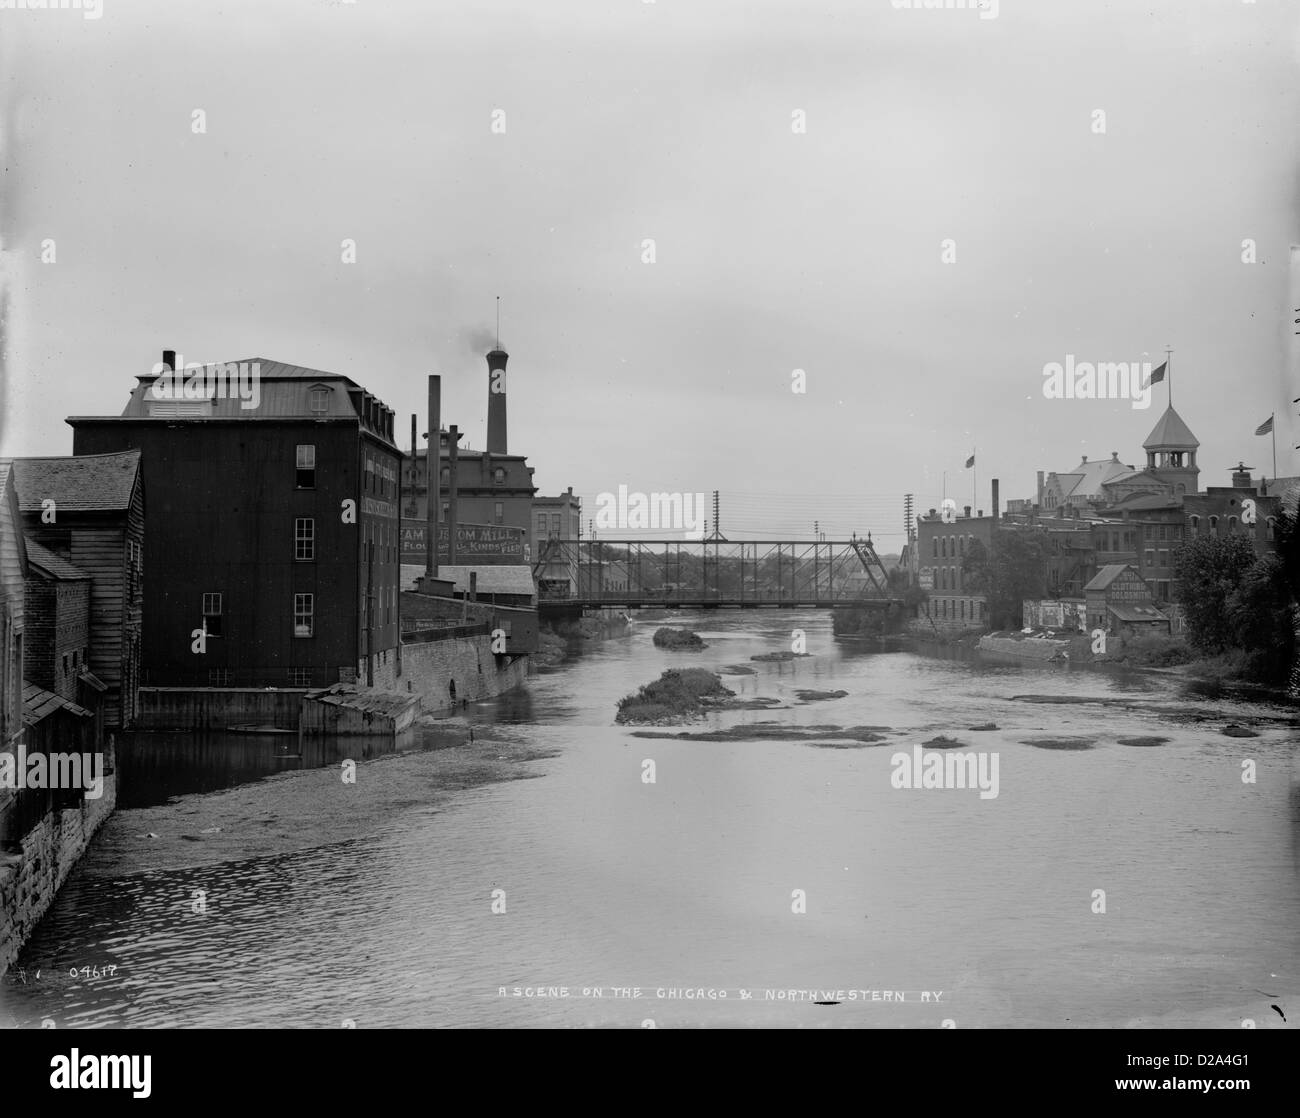 Scene On The Chicago & North Western Railway [Between 1880 And 1899] River With Pollution Stock Photo